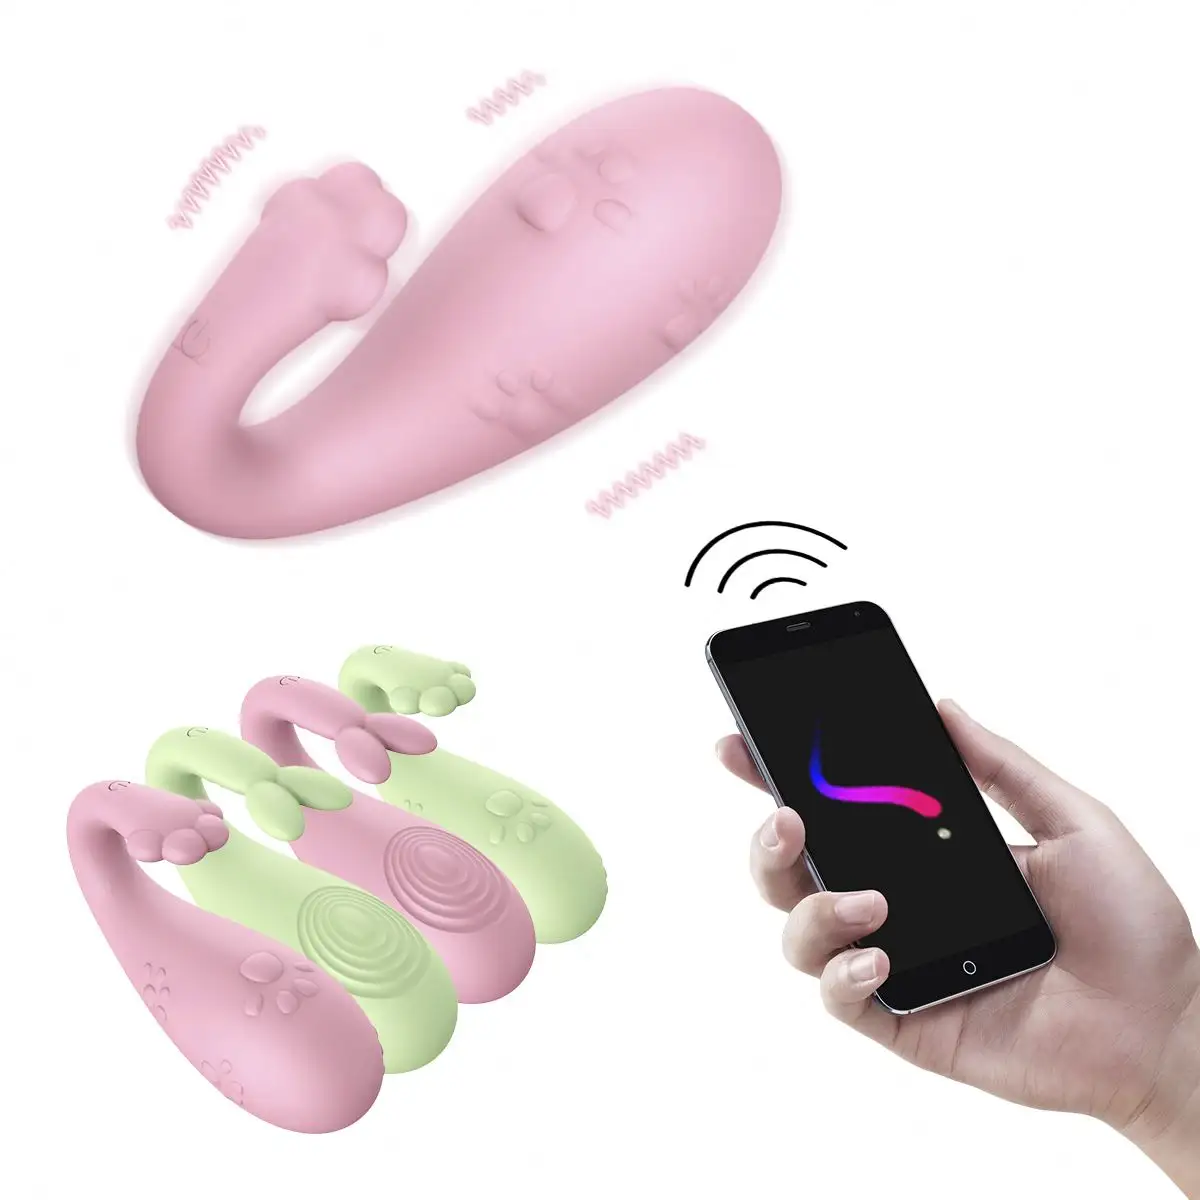 Source New Style Silicone Wireless Remote App/Phone Controlled Vaginal Vibrator Intelligent Women Girl Sex Toys Vibrating on m.alibaba pic picture